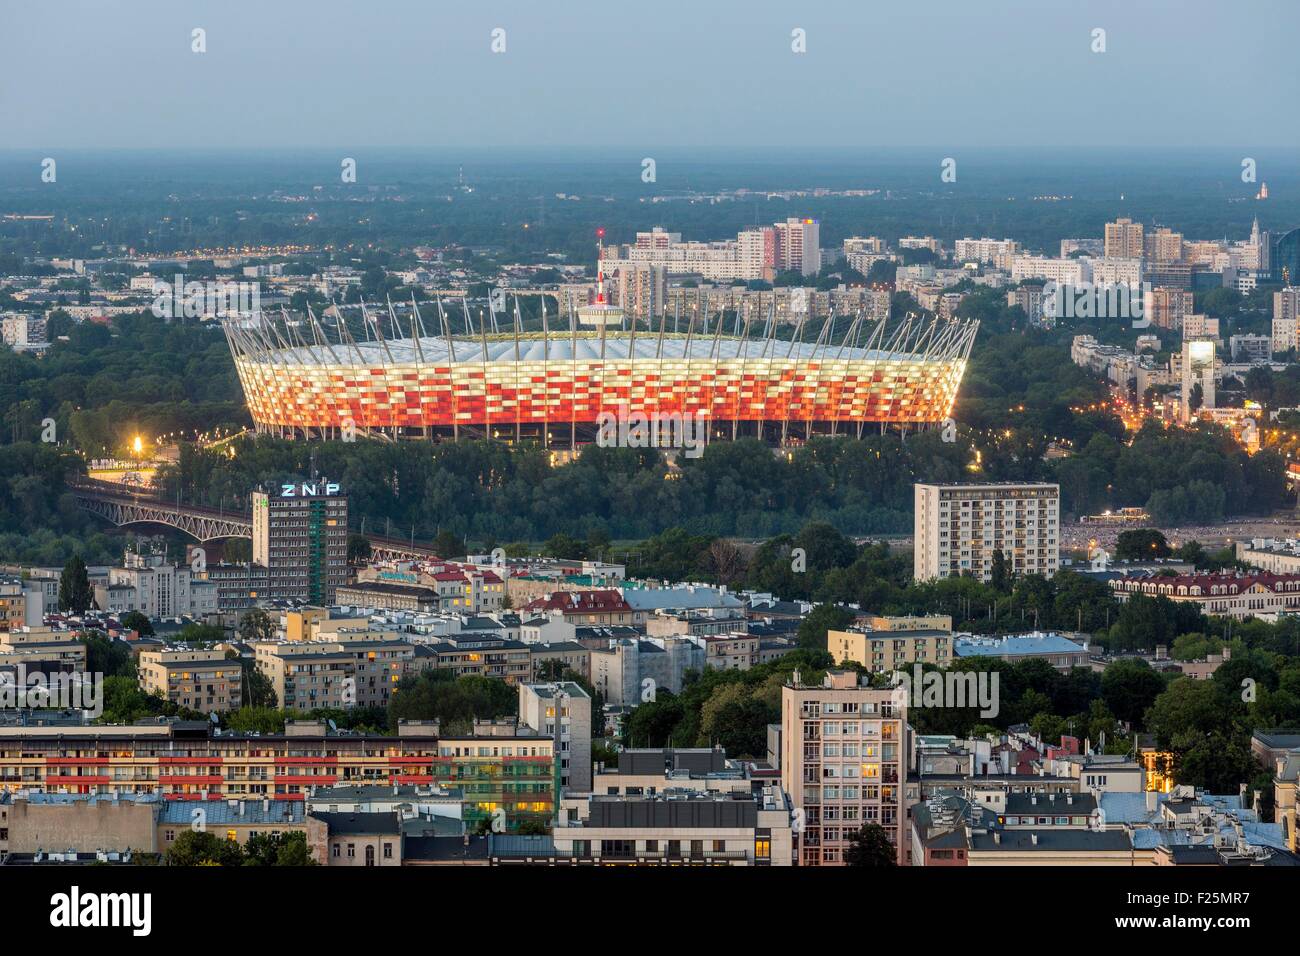 Poland, Mazovia region, Warsaw, general view of the National Stadium from the Palace of Science and Culture Stock Photo